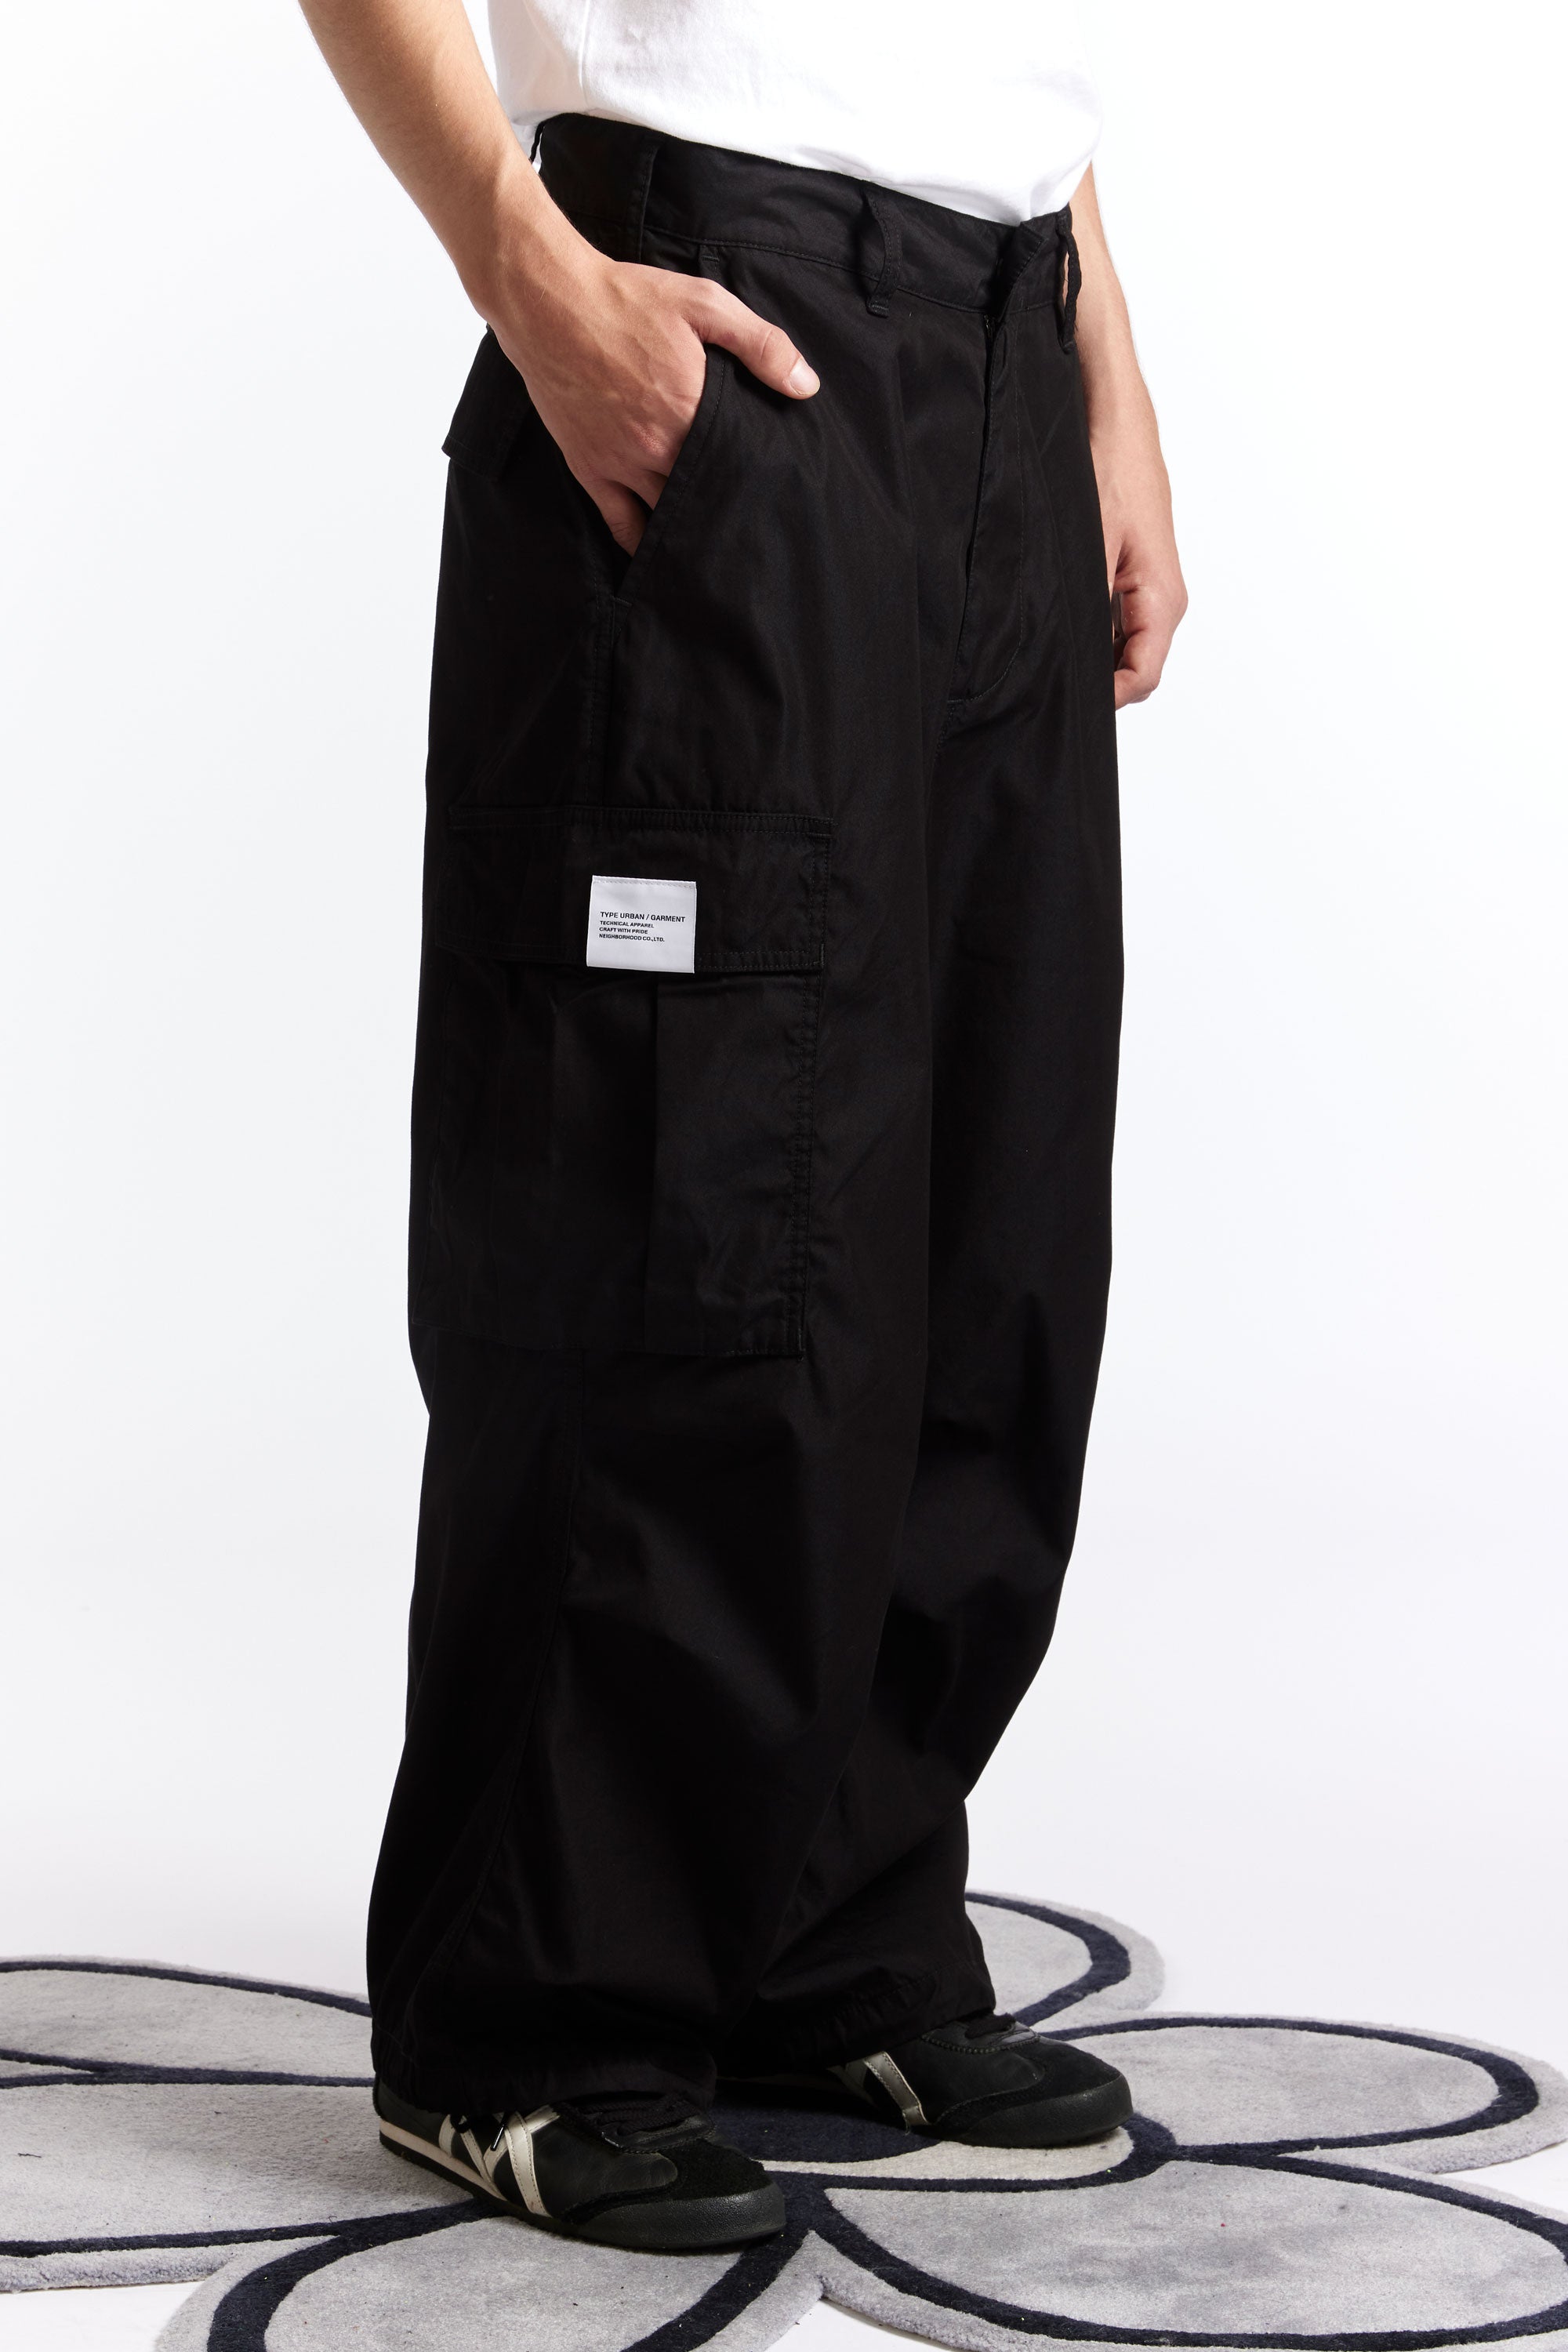 The NEIGHBORHOOD - WIDE CARGO PANTS AW23 BLACK available online with global shipping, and in PAM Stores Melbourne and Sydney.